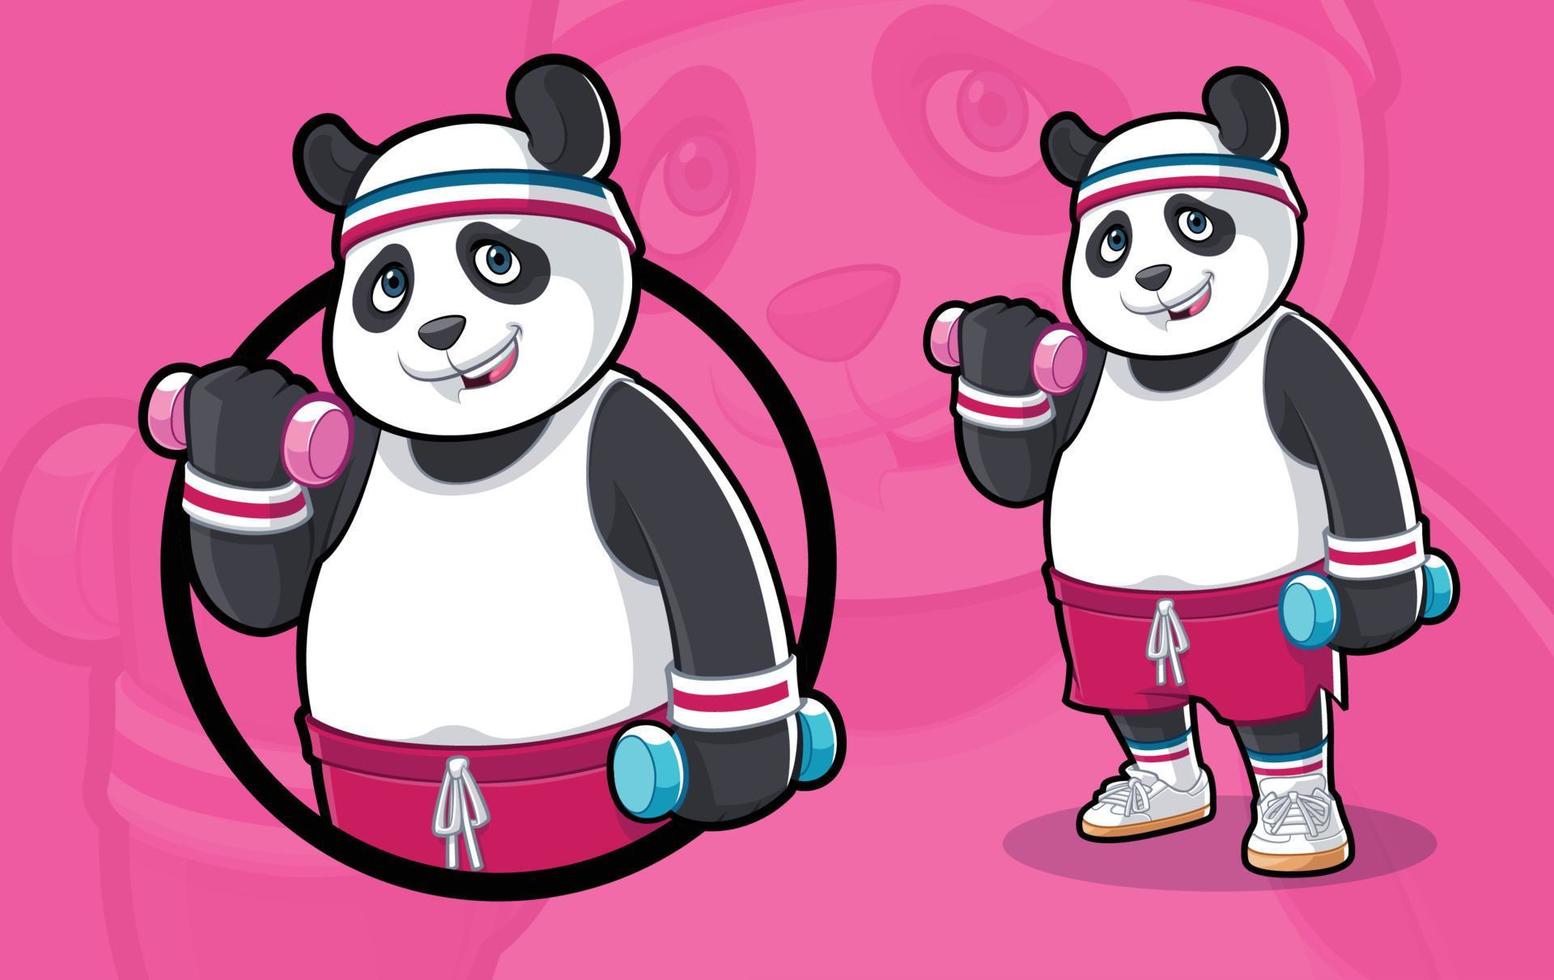 Panda Working Outs With Dumbell vector